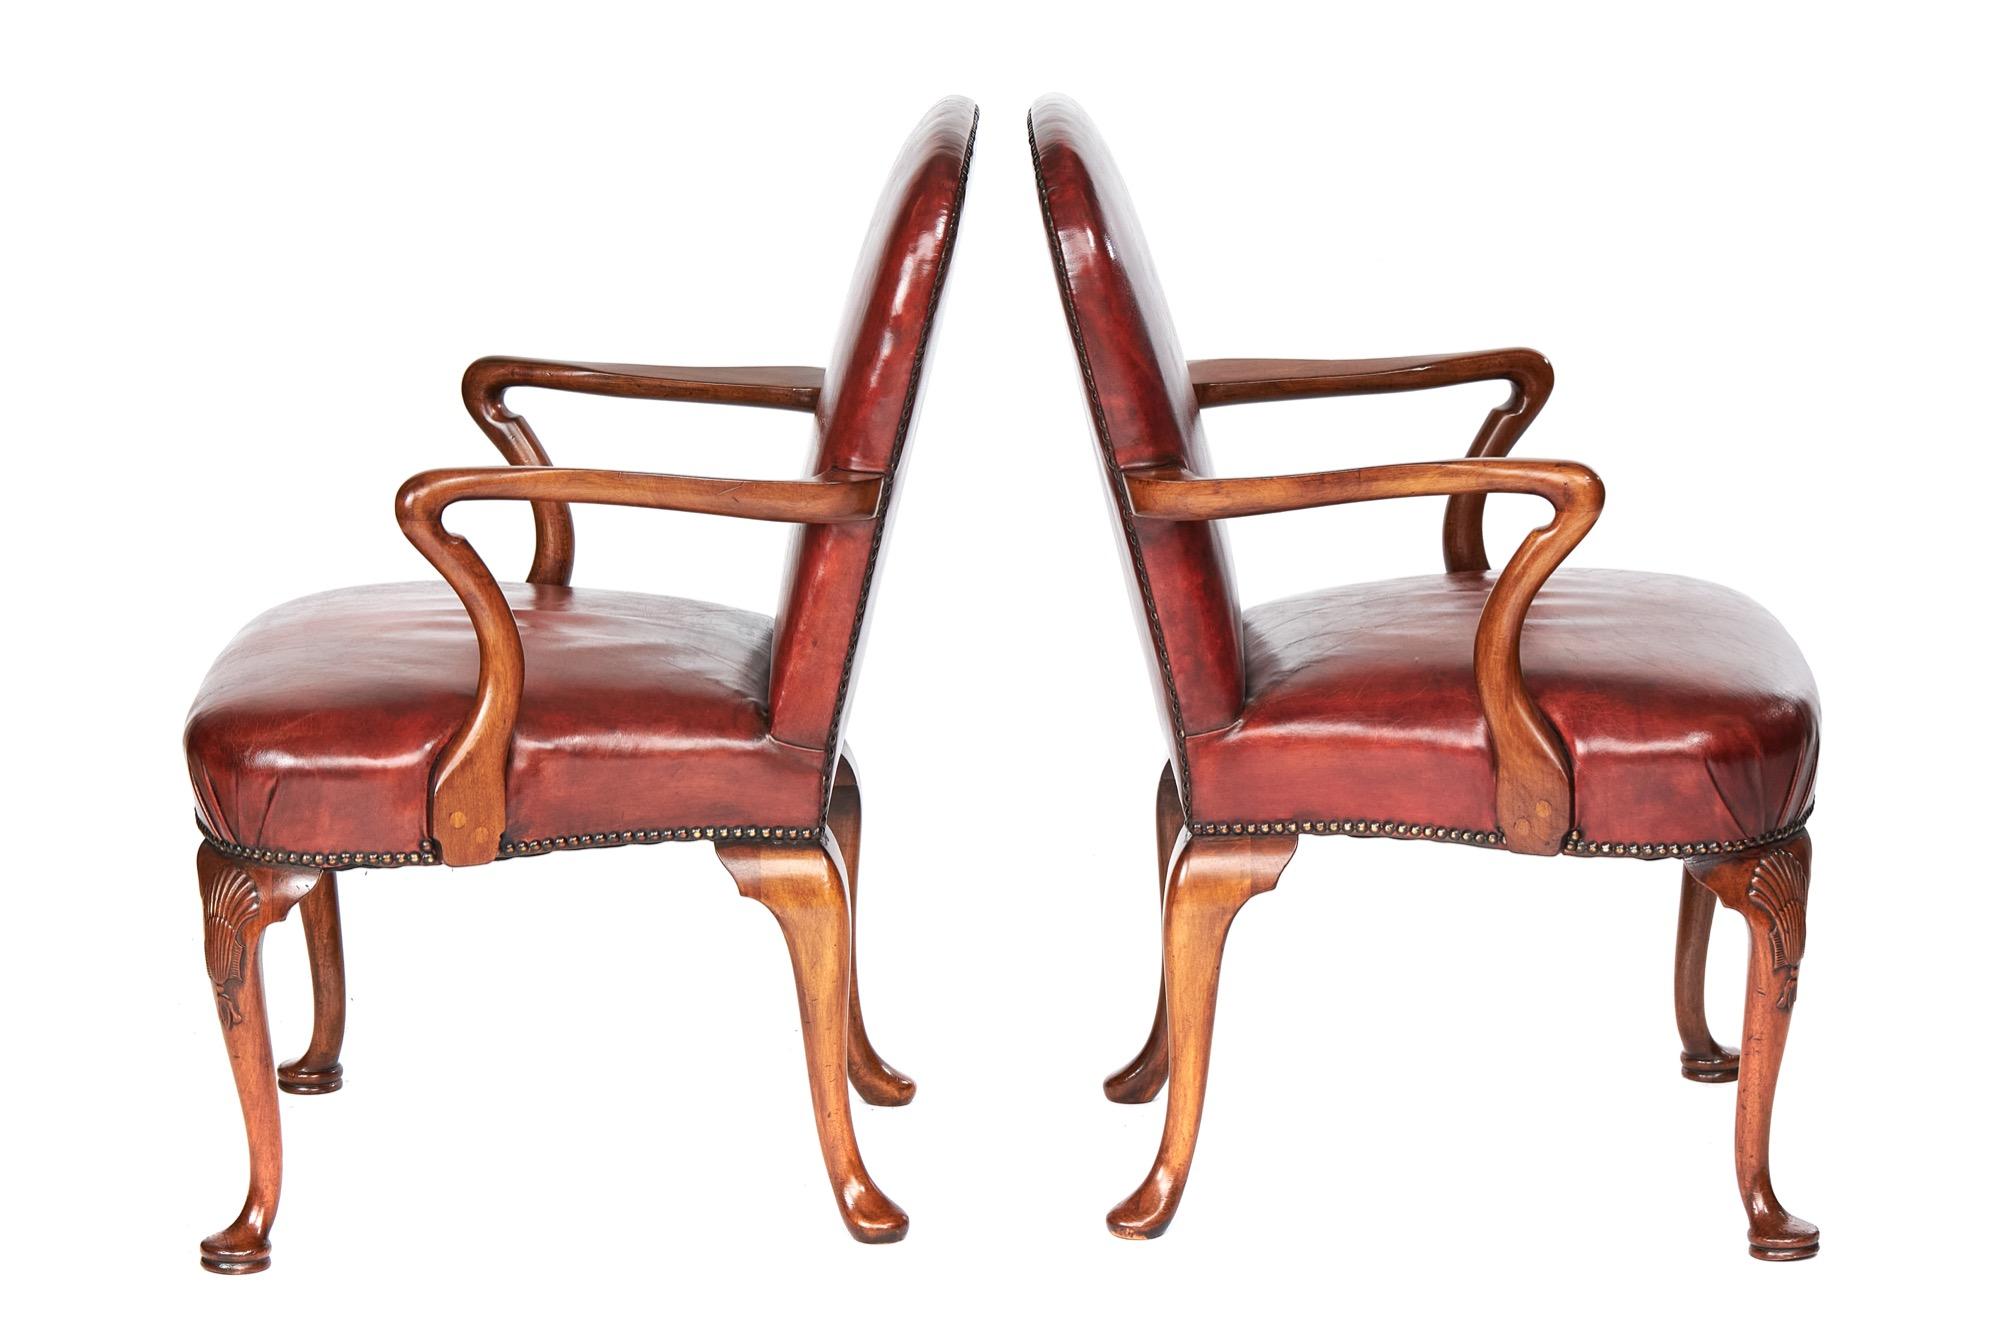 George I Pair Georgian Revival Walnut & Leather Open Elbow Chairs, circa 1920s For Sale